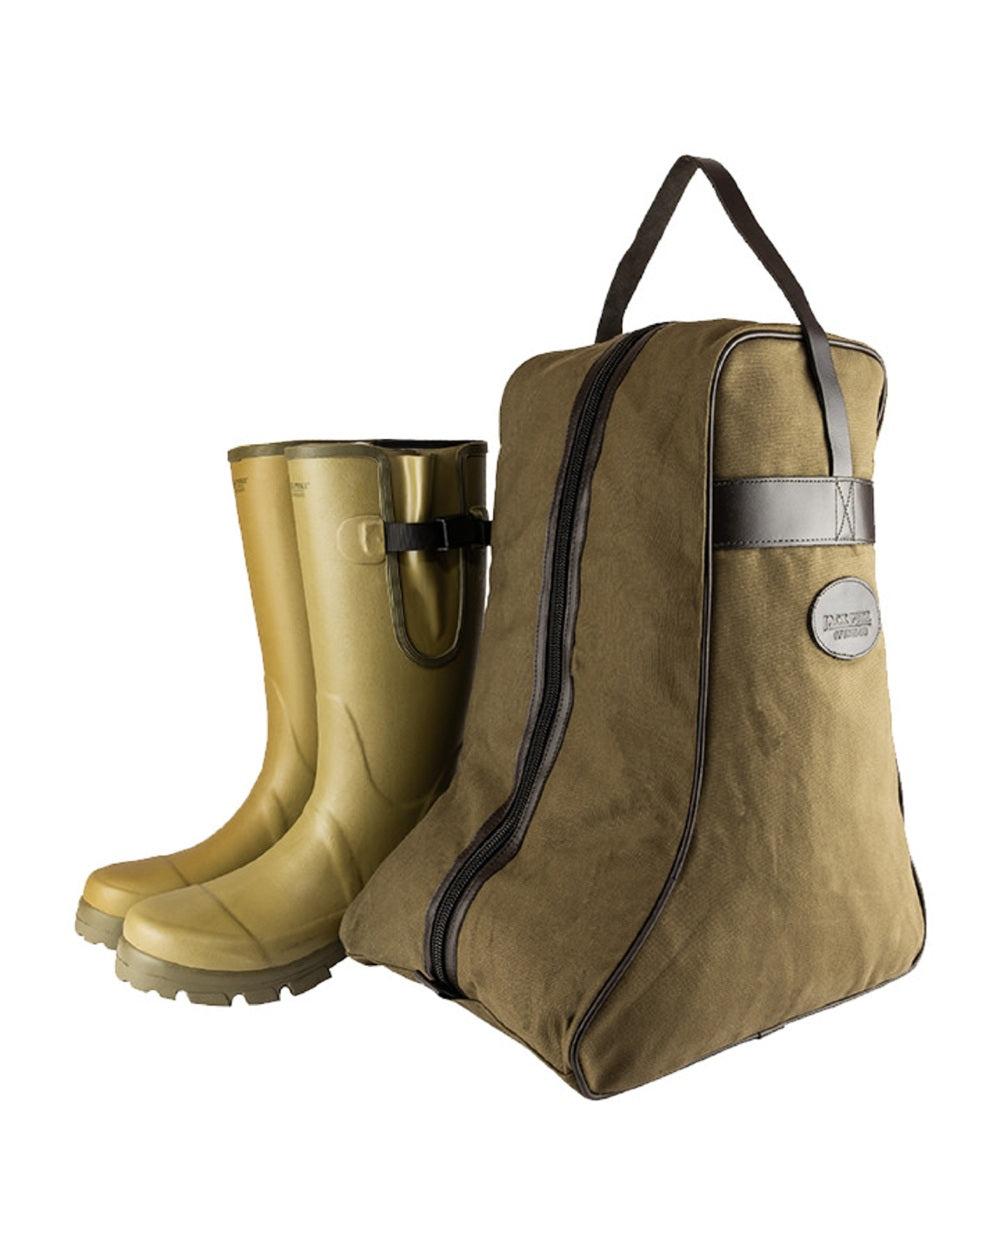 Jack Pyke Canvas Boot Bag in Green 